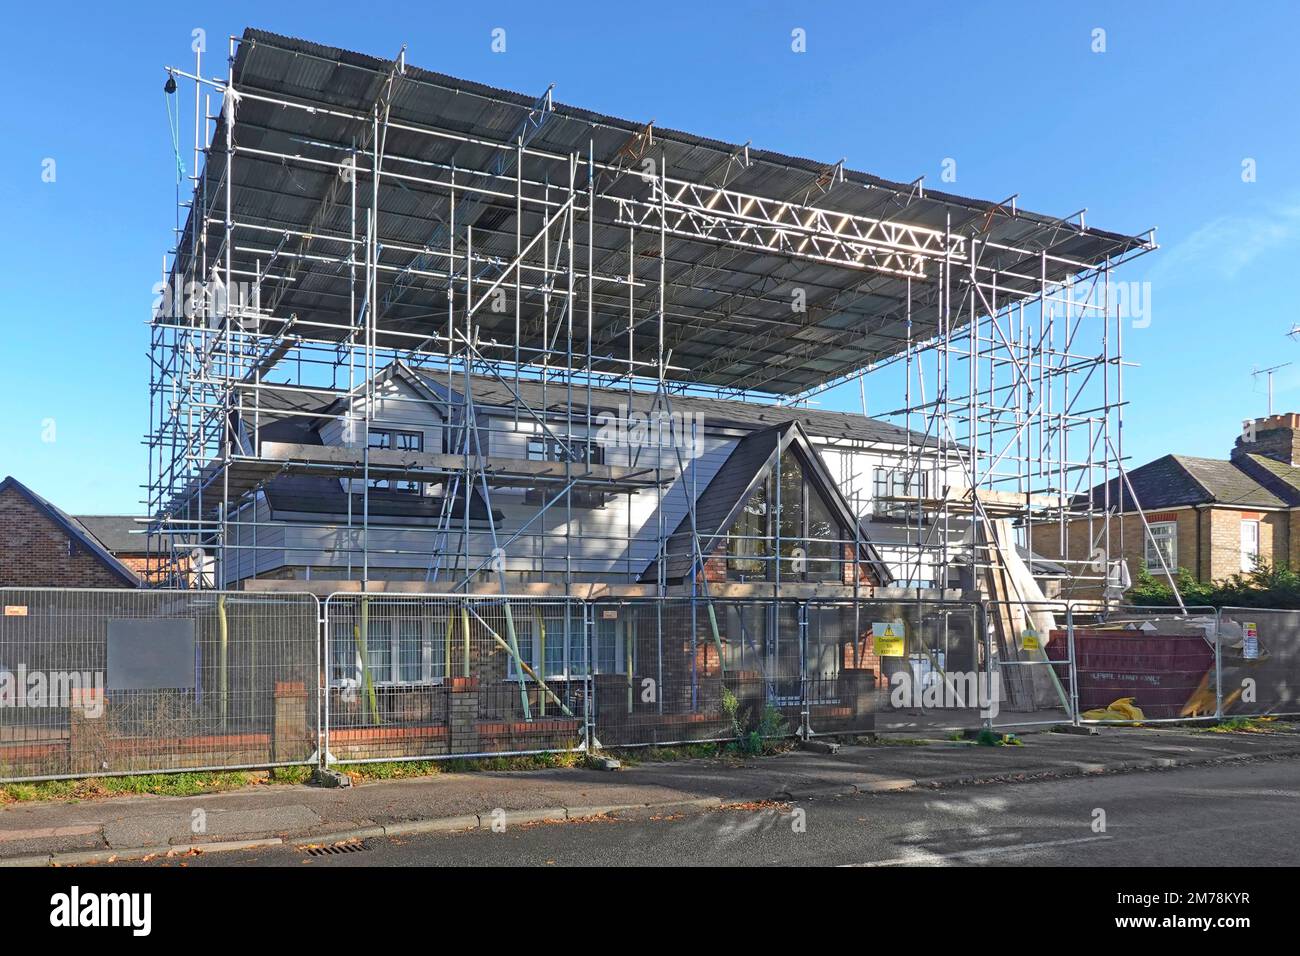 Building construction bungalow conversion to house vertical plastic sheeting removed corrugated roof on scaffolding ladder beam framework remains UK Stock Photo